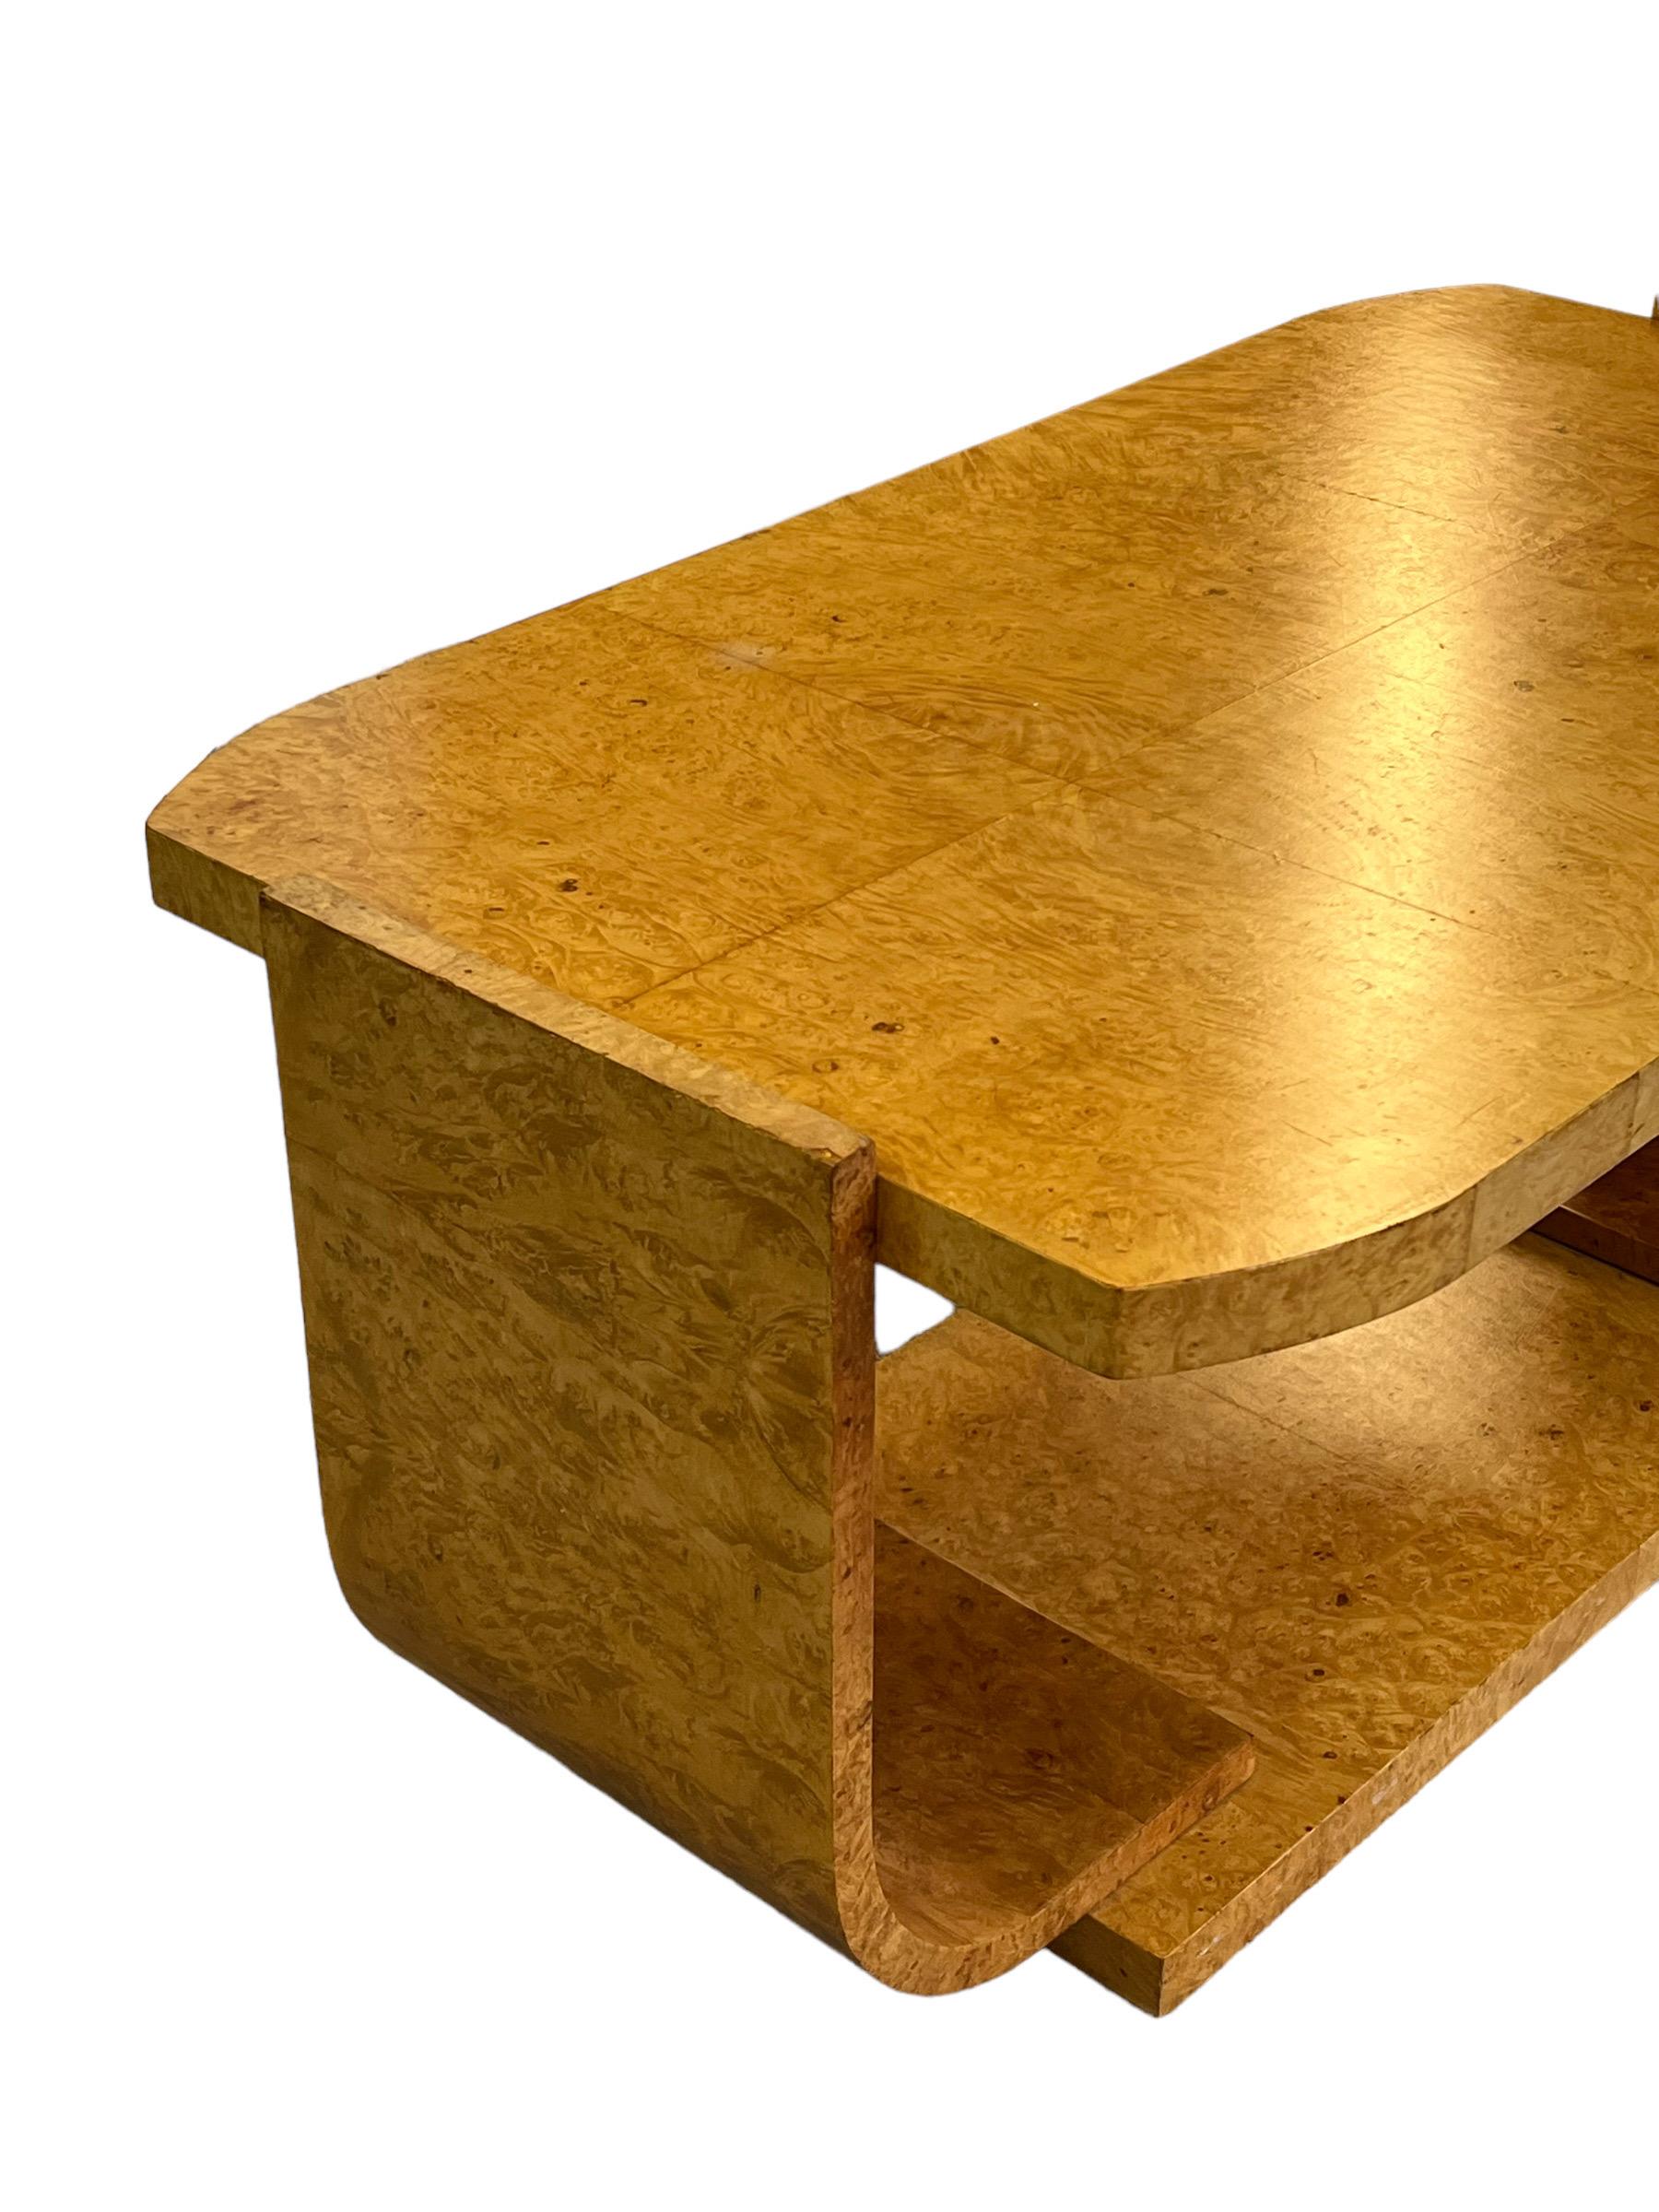 Wood A beautiful and extremely well made original Art Deco period coffee table  For Sale